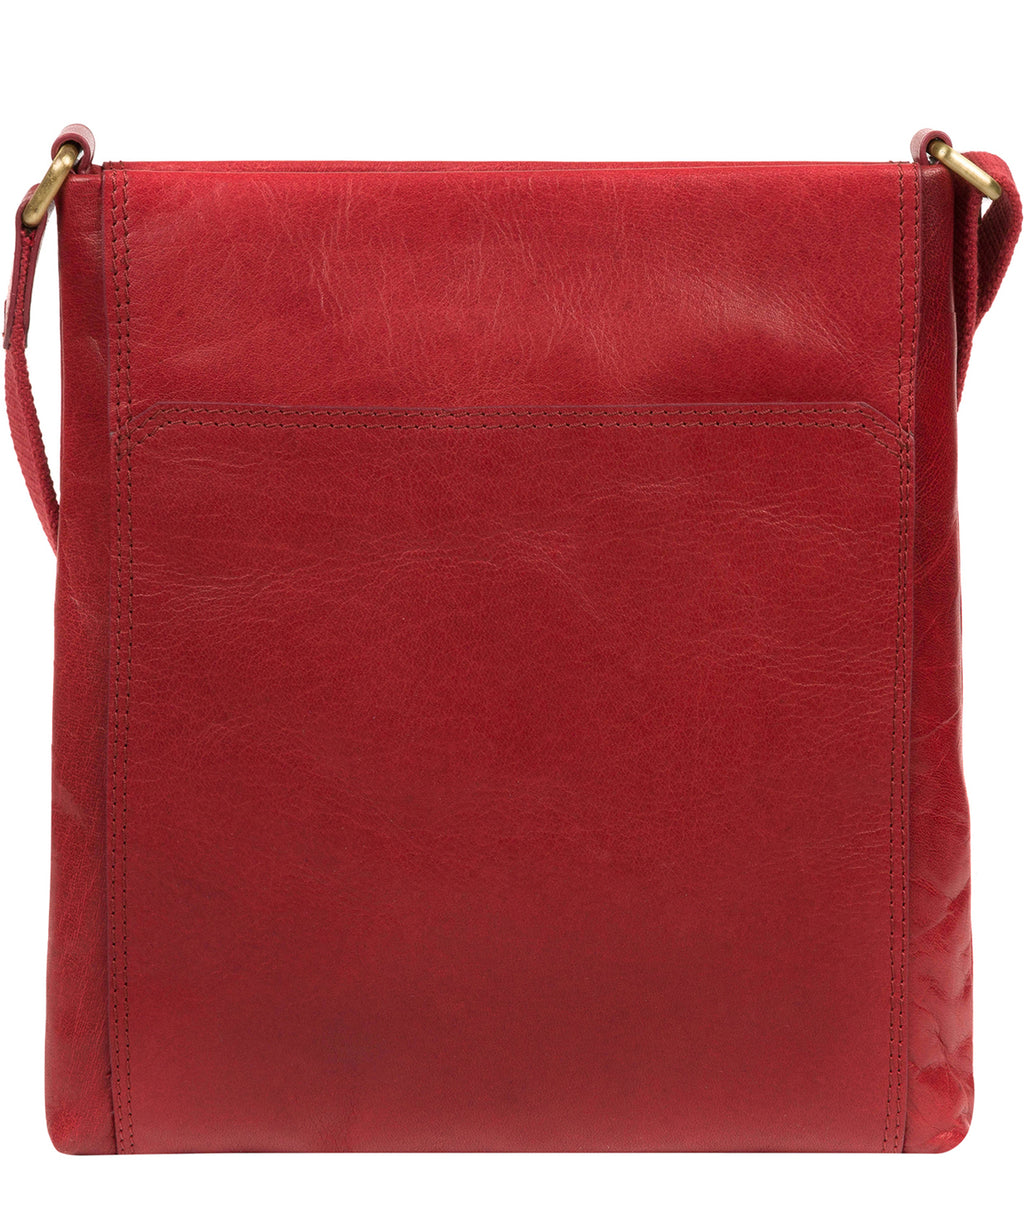 Red Leather Crossbody Bag 'Dink' by Conkca London – Pure Luxuries London